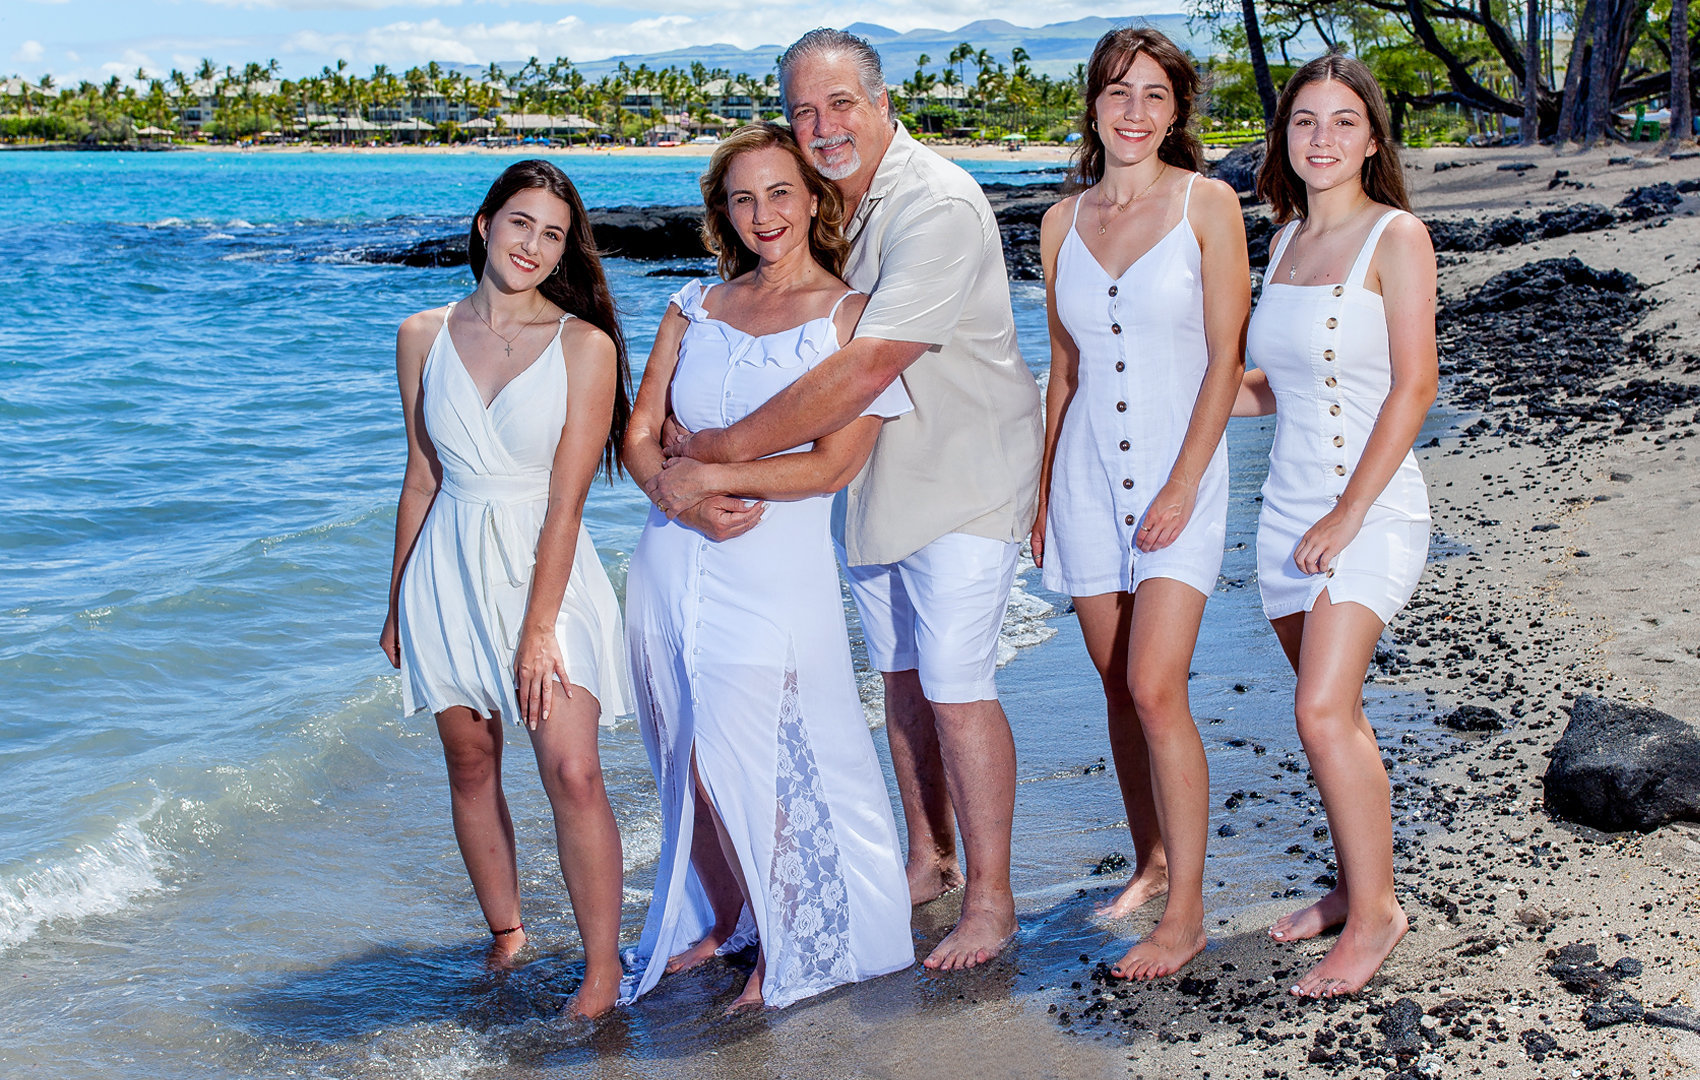 All in white and looking so bright, a family of five with three beautiful daughters.